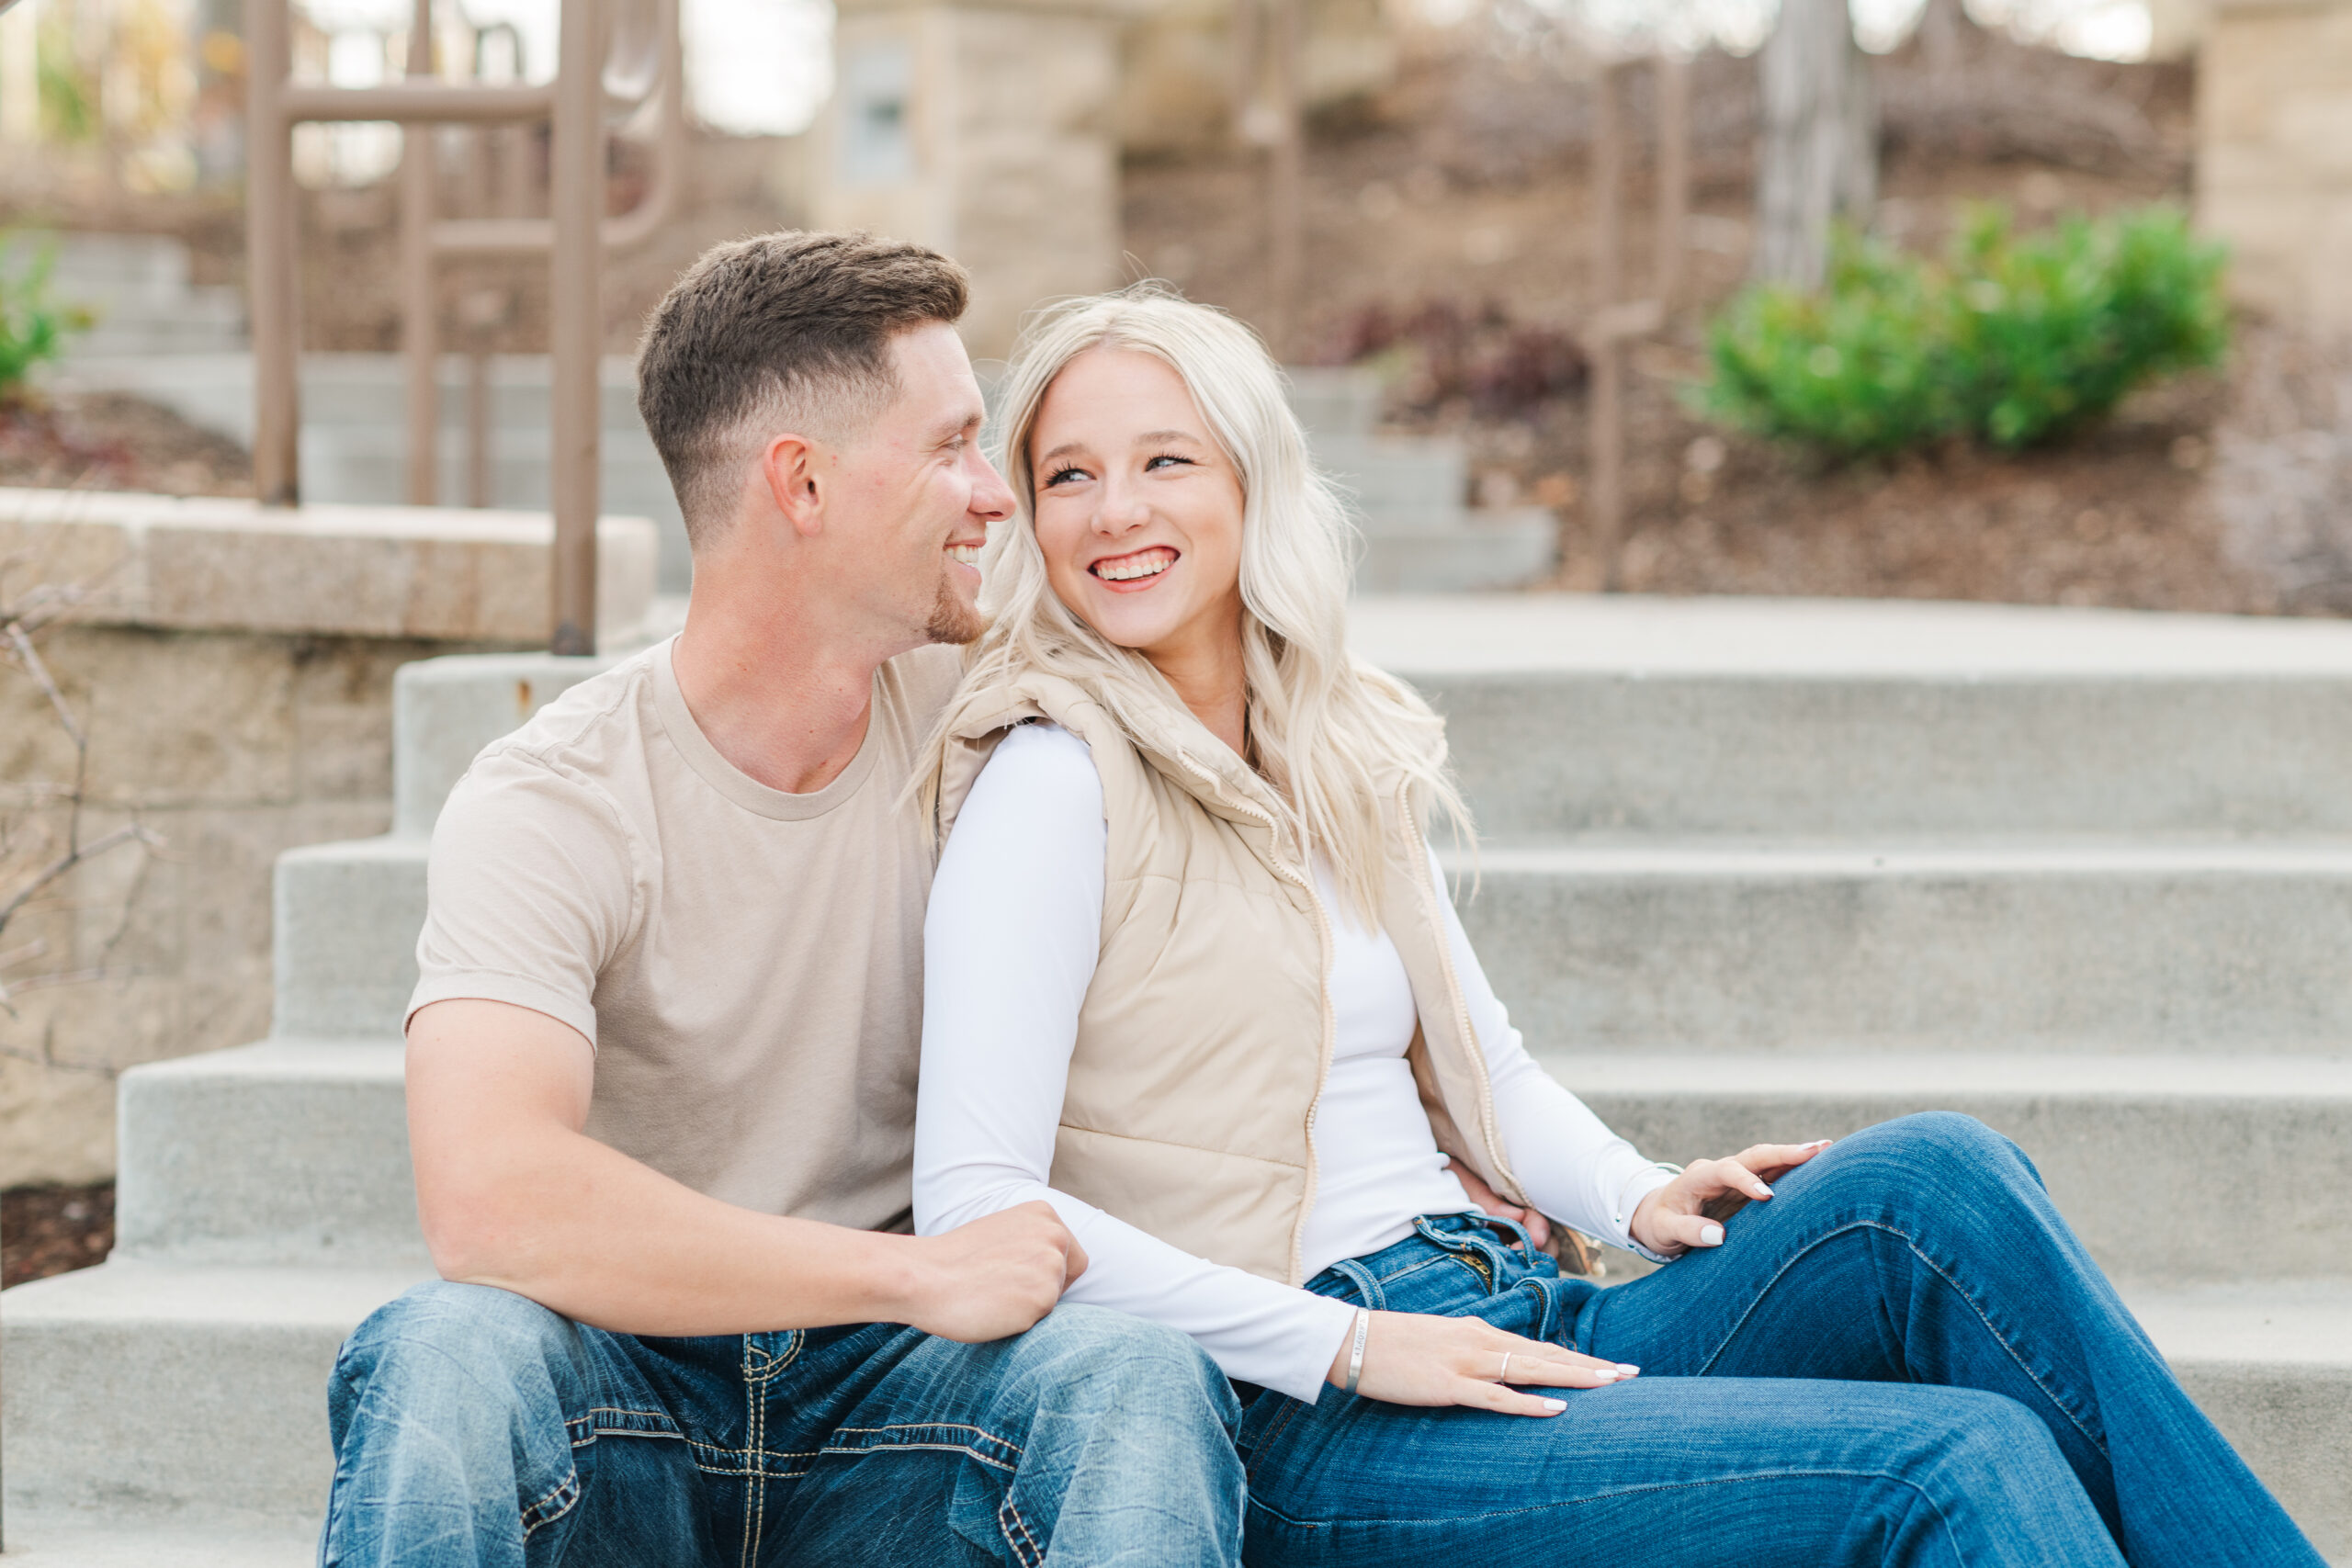 An engagement session photoshoot at Scentsy building in spring